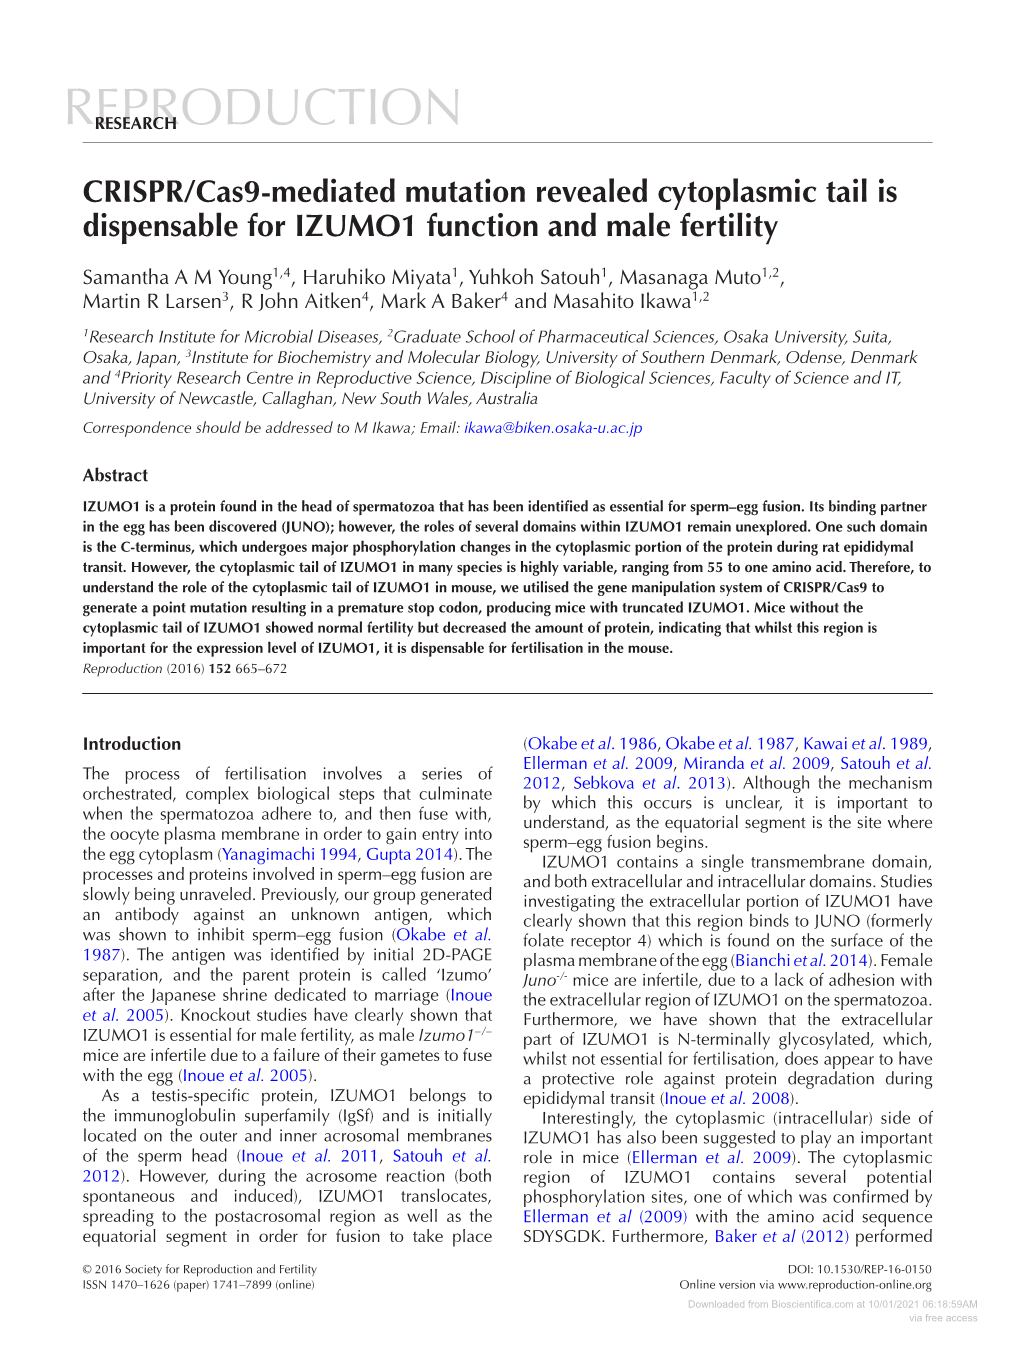 CRISPR/Cas9-Mediated Mutation Revealed Cytoplasmic Tail Is Dispensable for IZUMO1 Function and Male Fertility